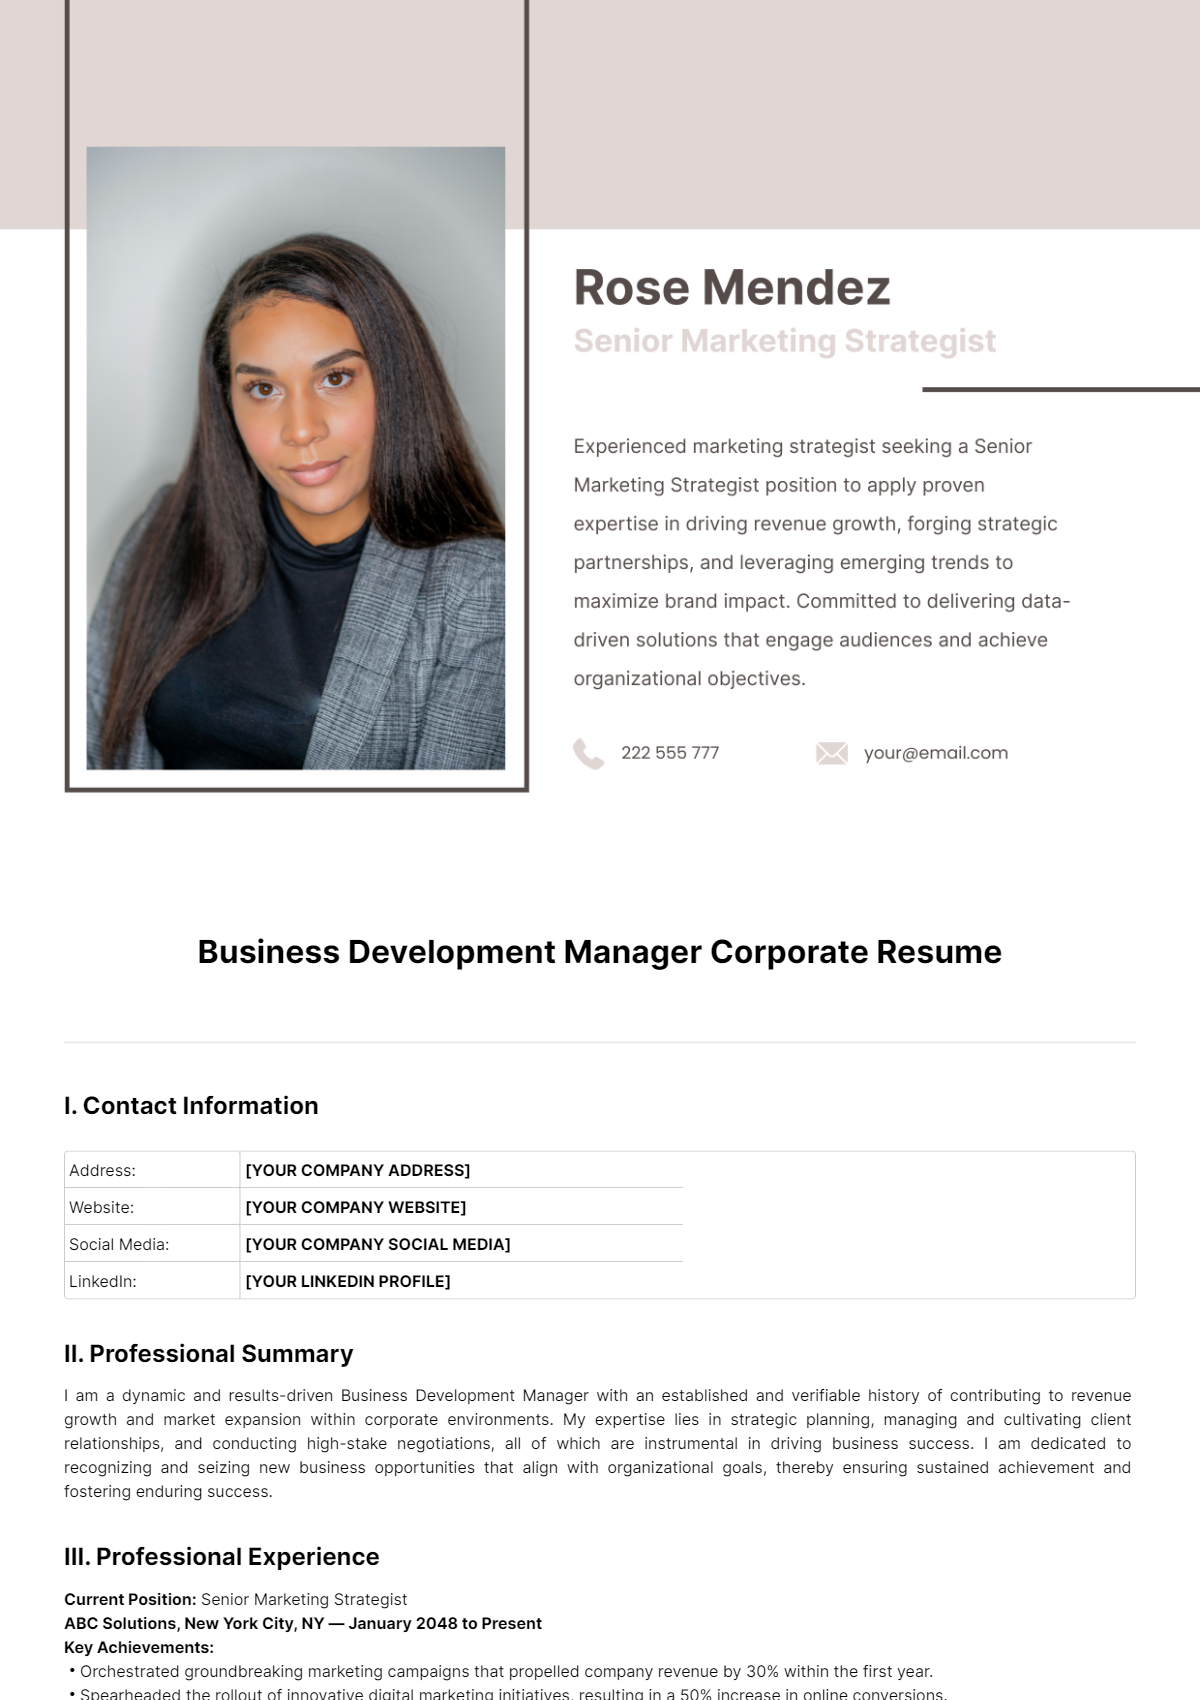 Business Development Manager Corporate Resume Template